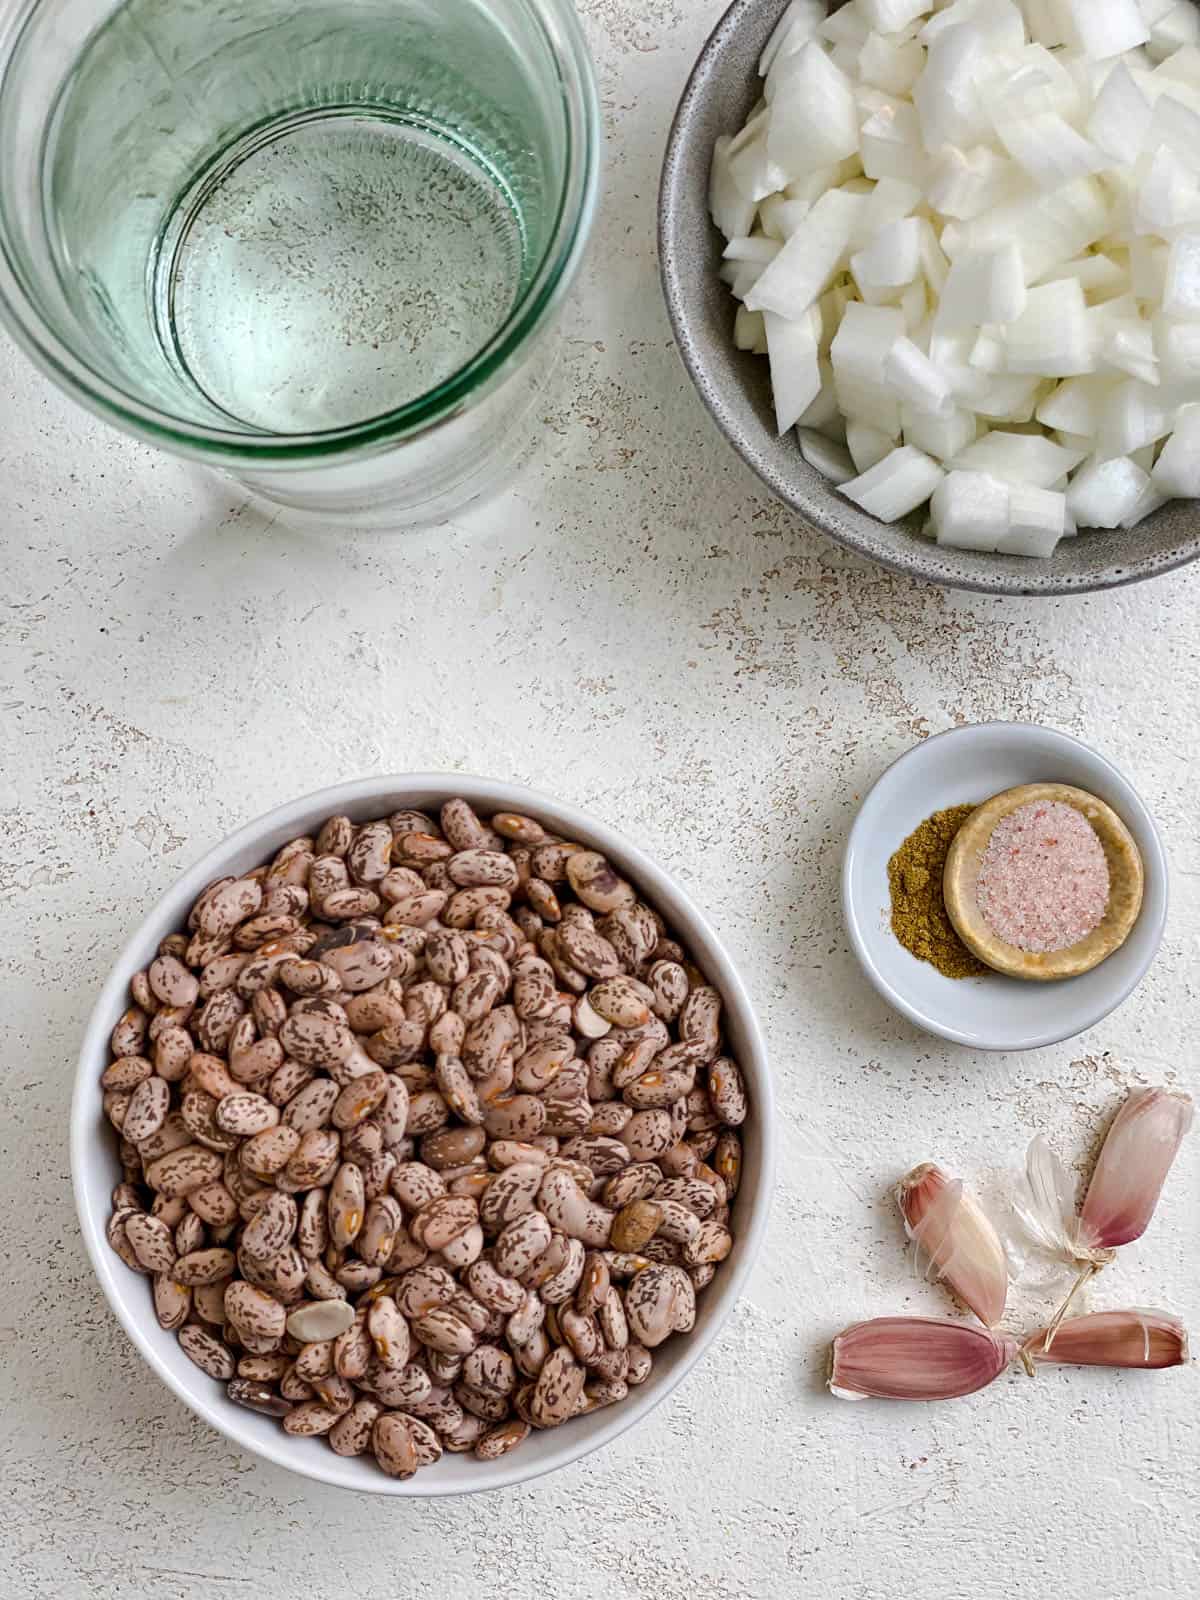 ingredients for Instant Pot Pinto Beans measured out against a white surface